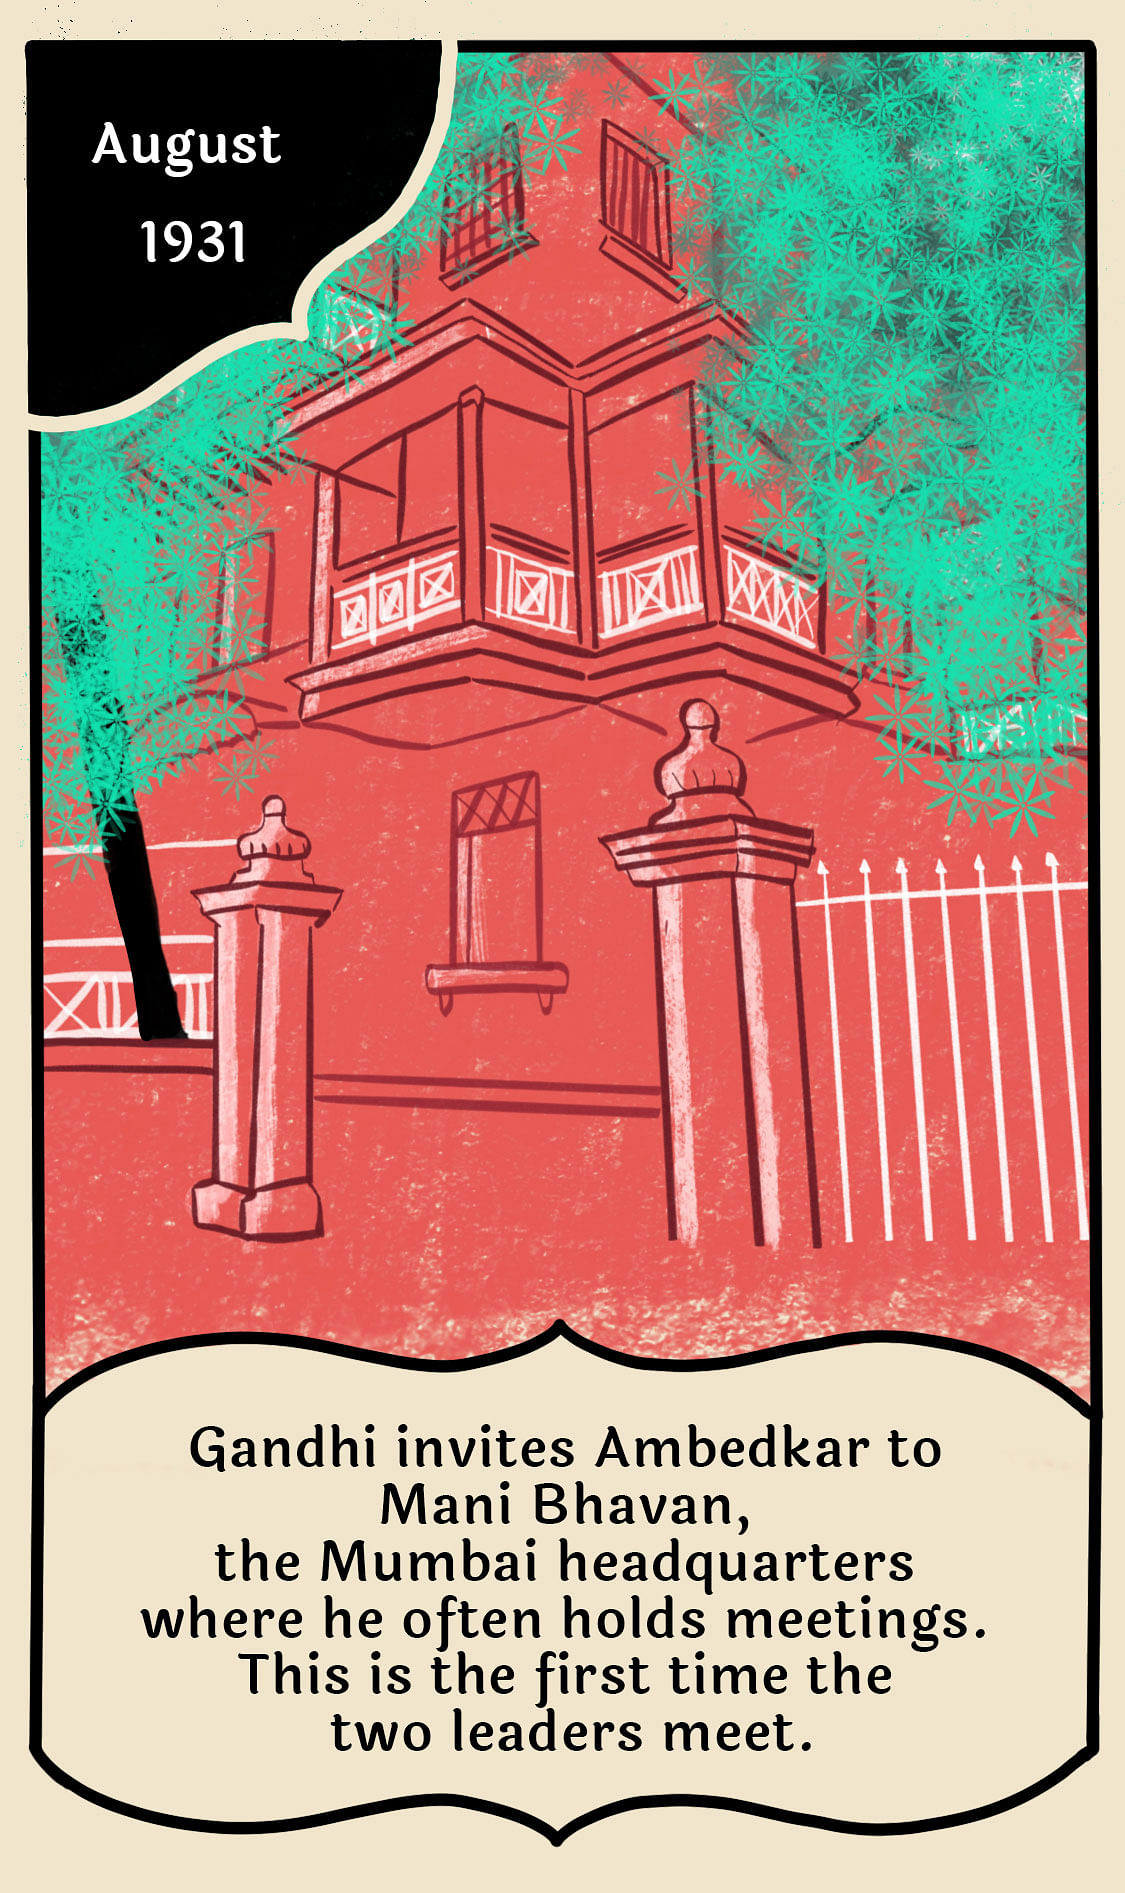 Both Ambedkar and Gandhi had a common dream of eradicating untouchability, but their paths were different.